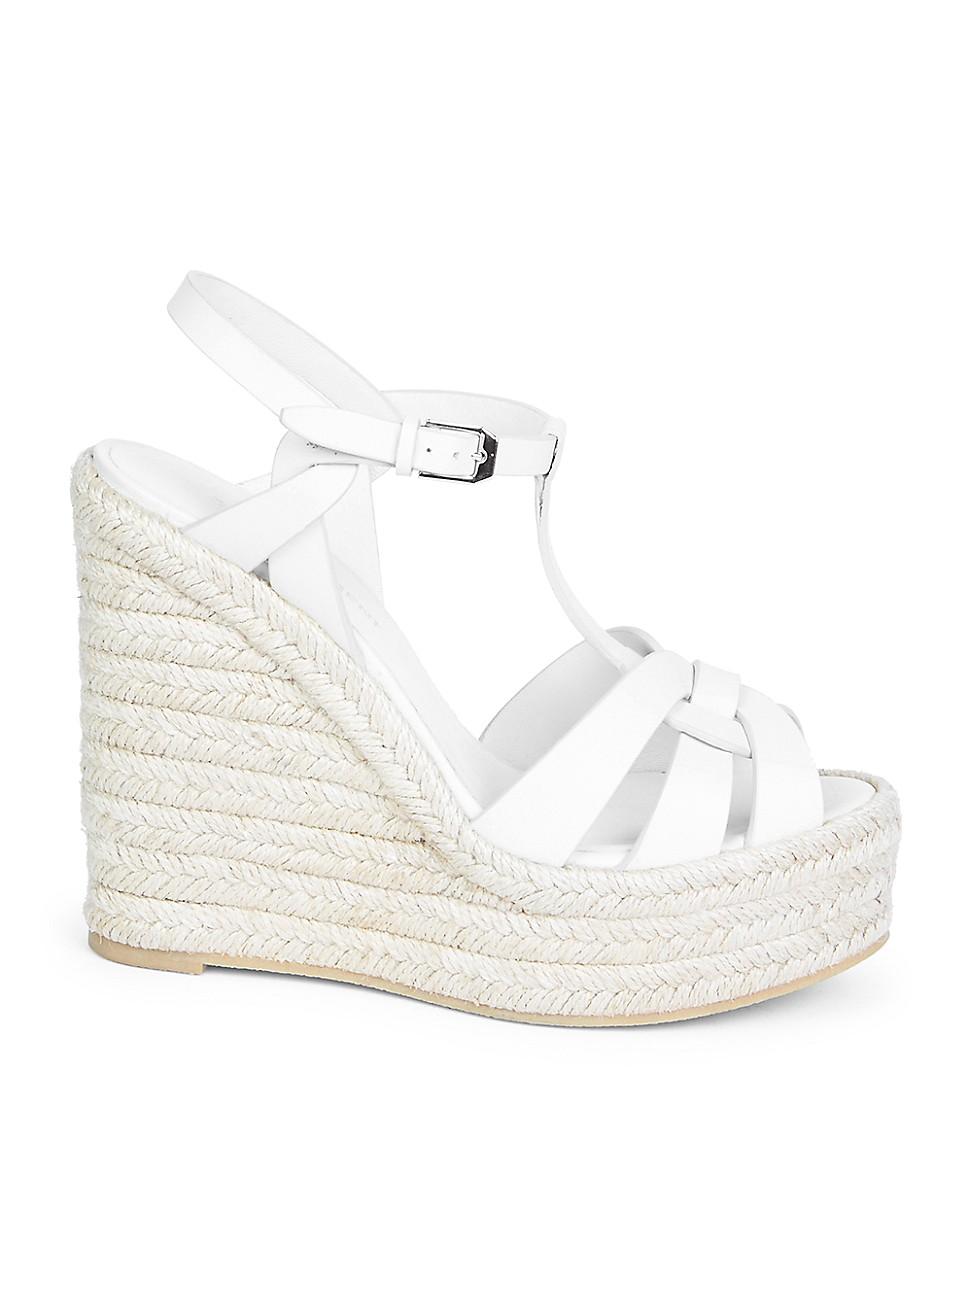 Saint Laurent Tribute Leather Espadrille Wedge Sandals in White - Save ...